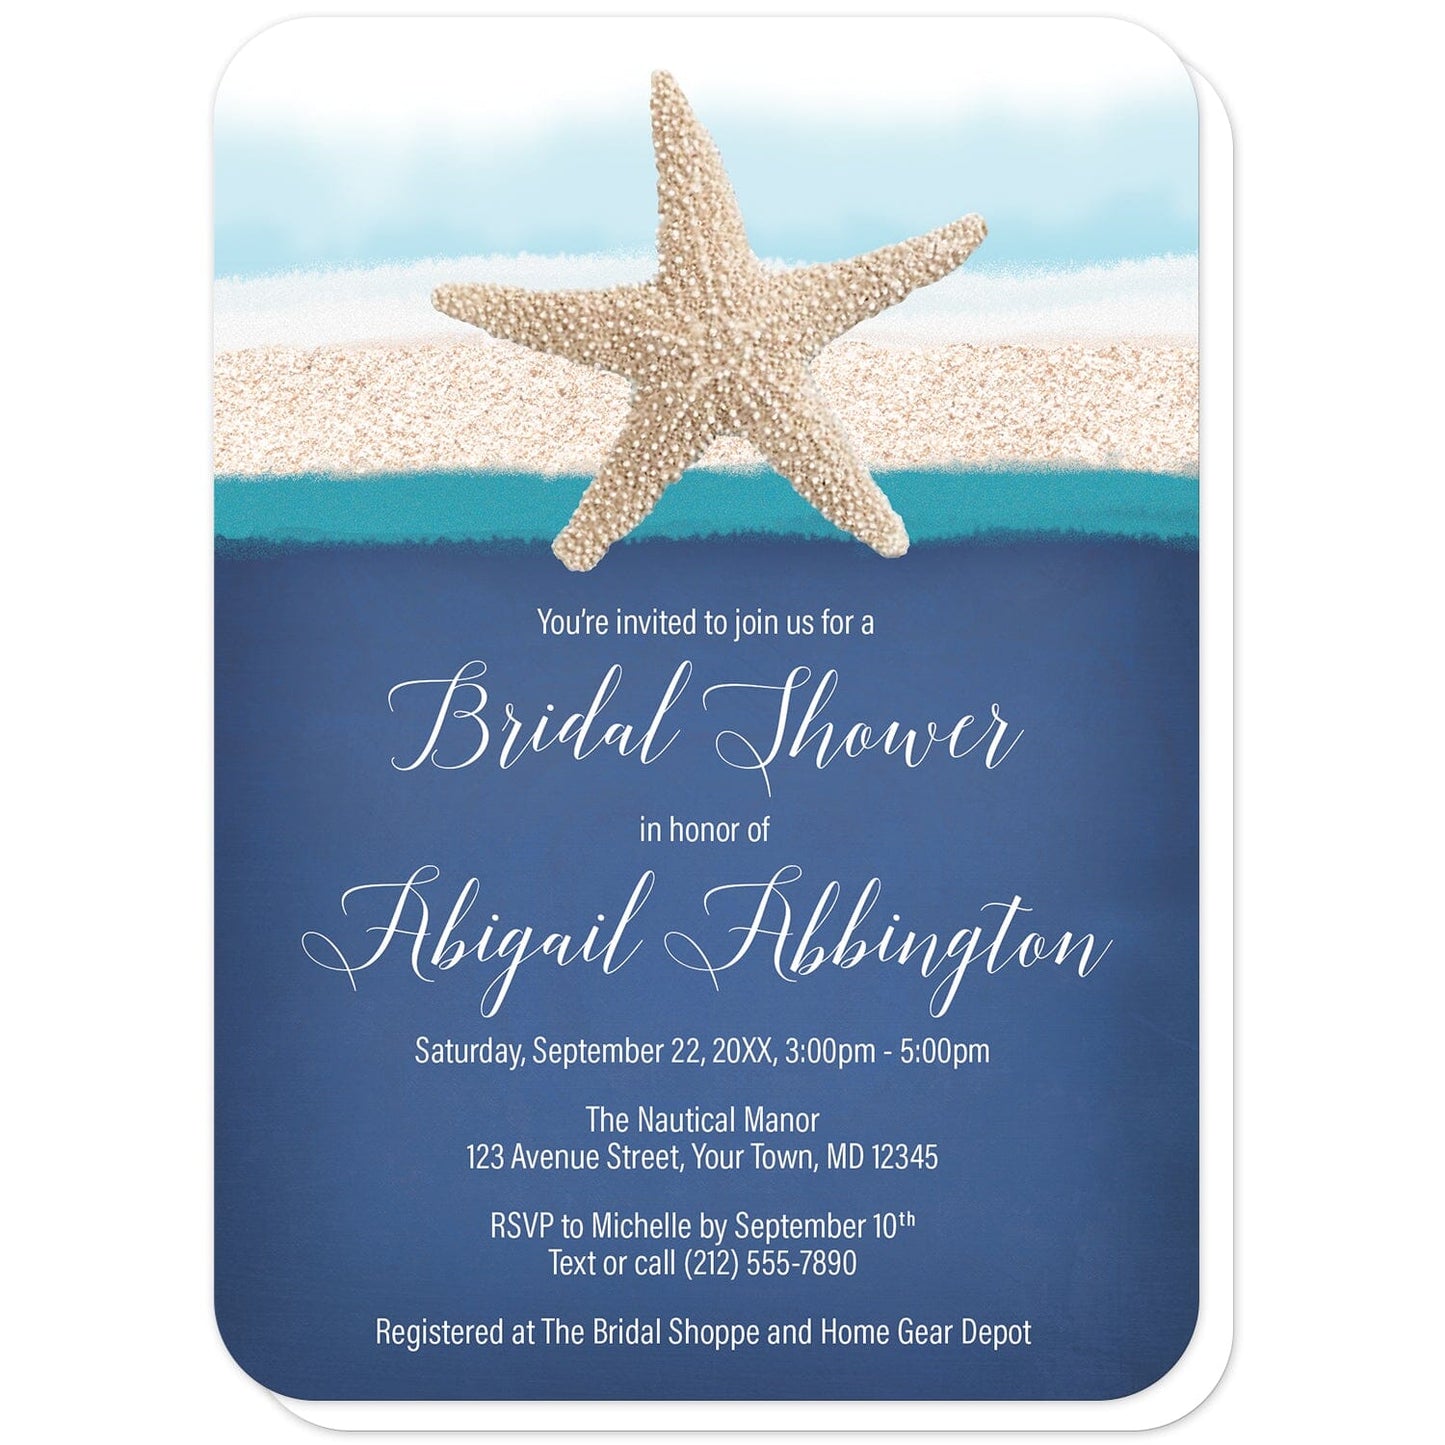 Starfish Navy Blue Teal Beach Bridal Shower Invitations (with rounded corners) at Artistically Invited. Starfish navy blue teal beach bridal shower invitations with a starfish image over a rough watercolor and sand stripe illustration in white, blue, beige, and teal along the top. Your personalized bridal shower celebration details are custom printed in white over a rough navy blue background design below the sea star.